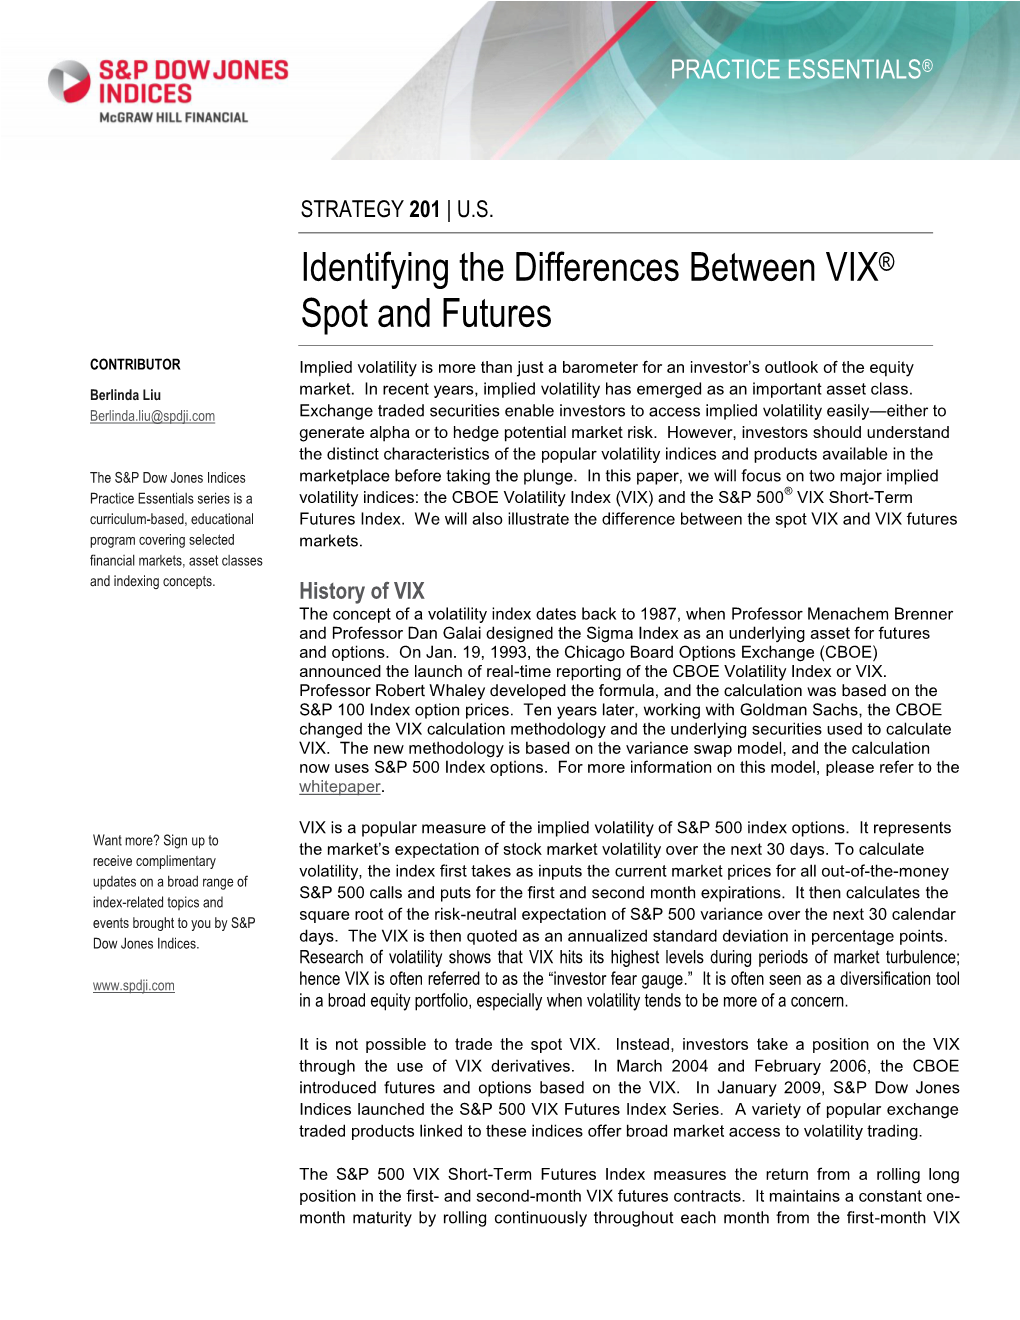 Identifying the Differences Between VIX® Spot and Futures